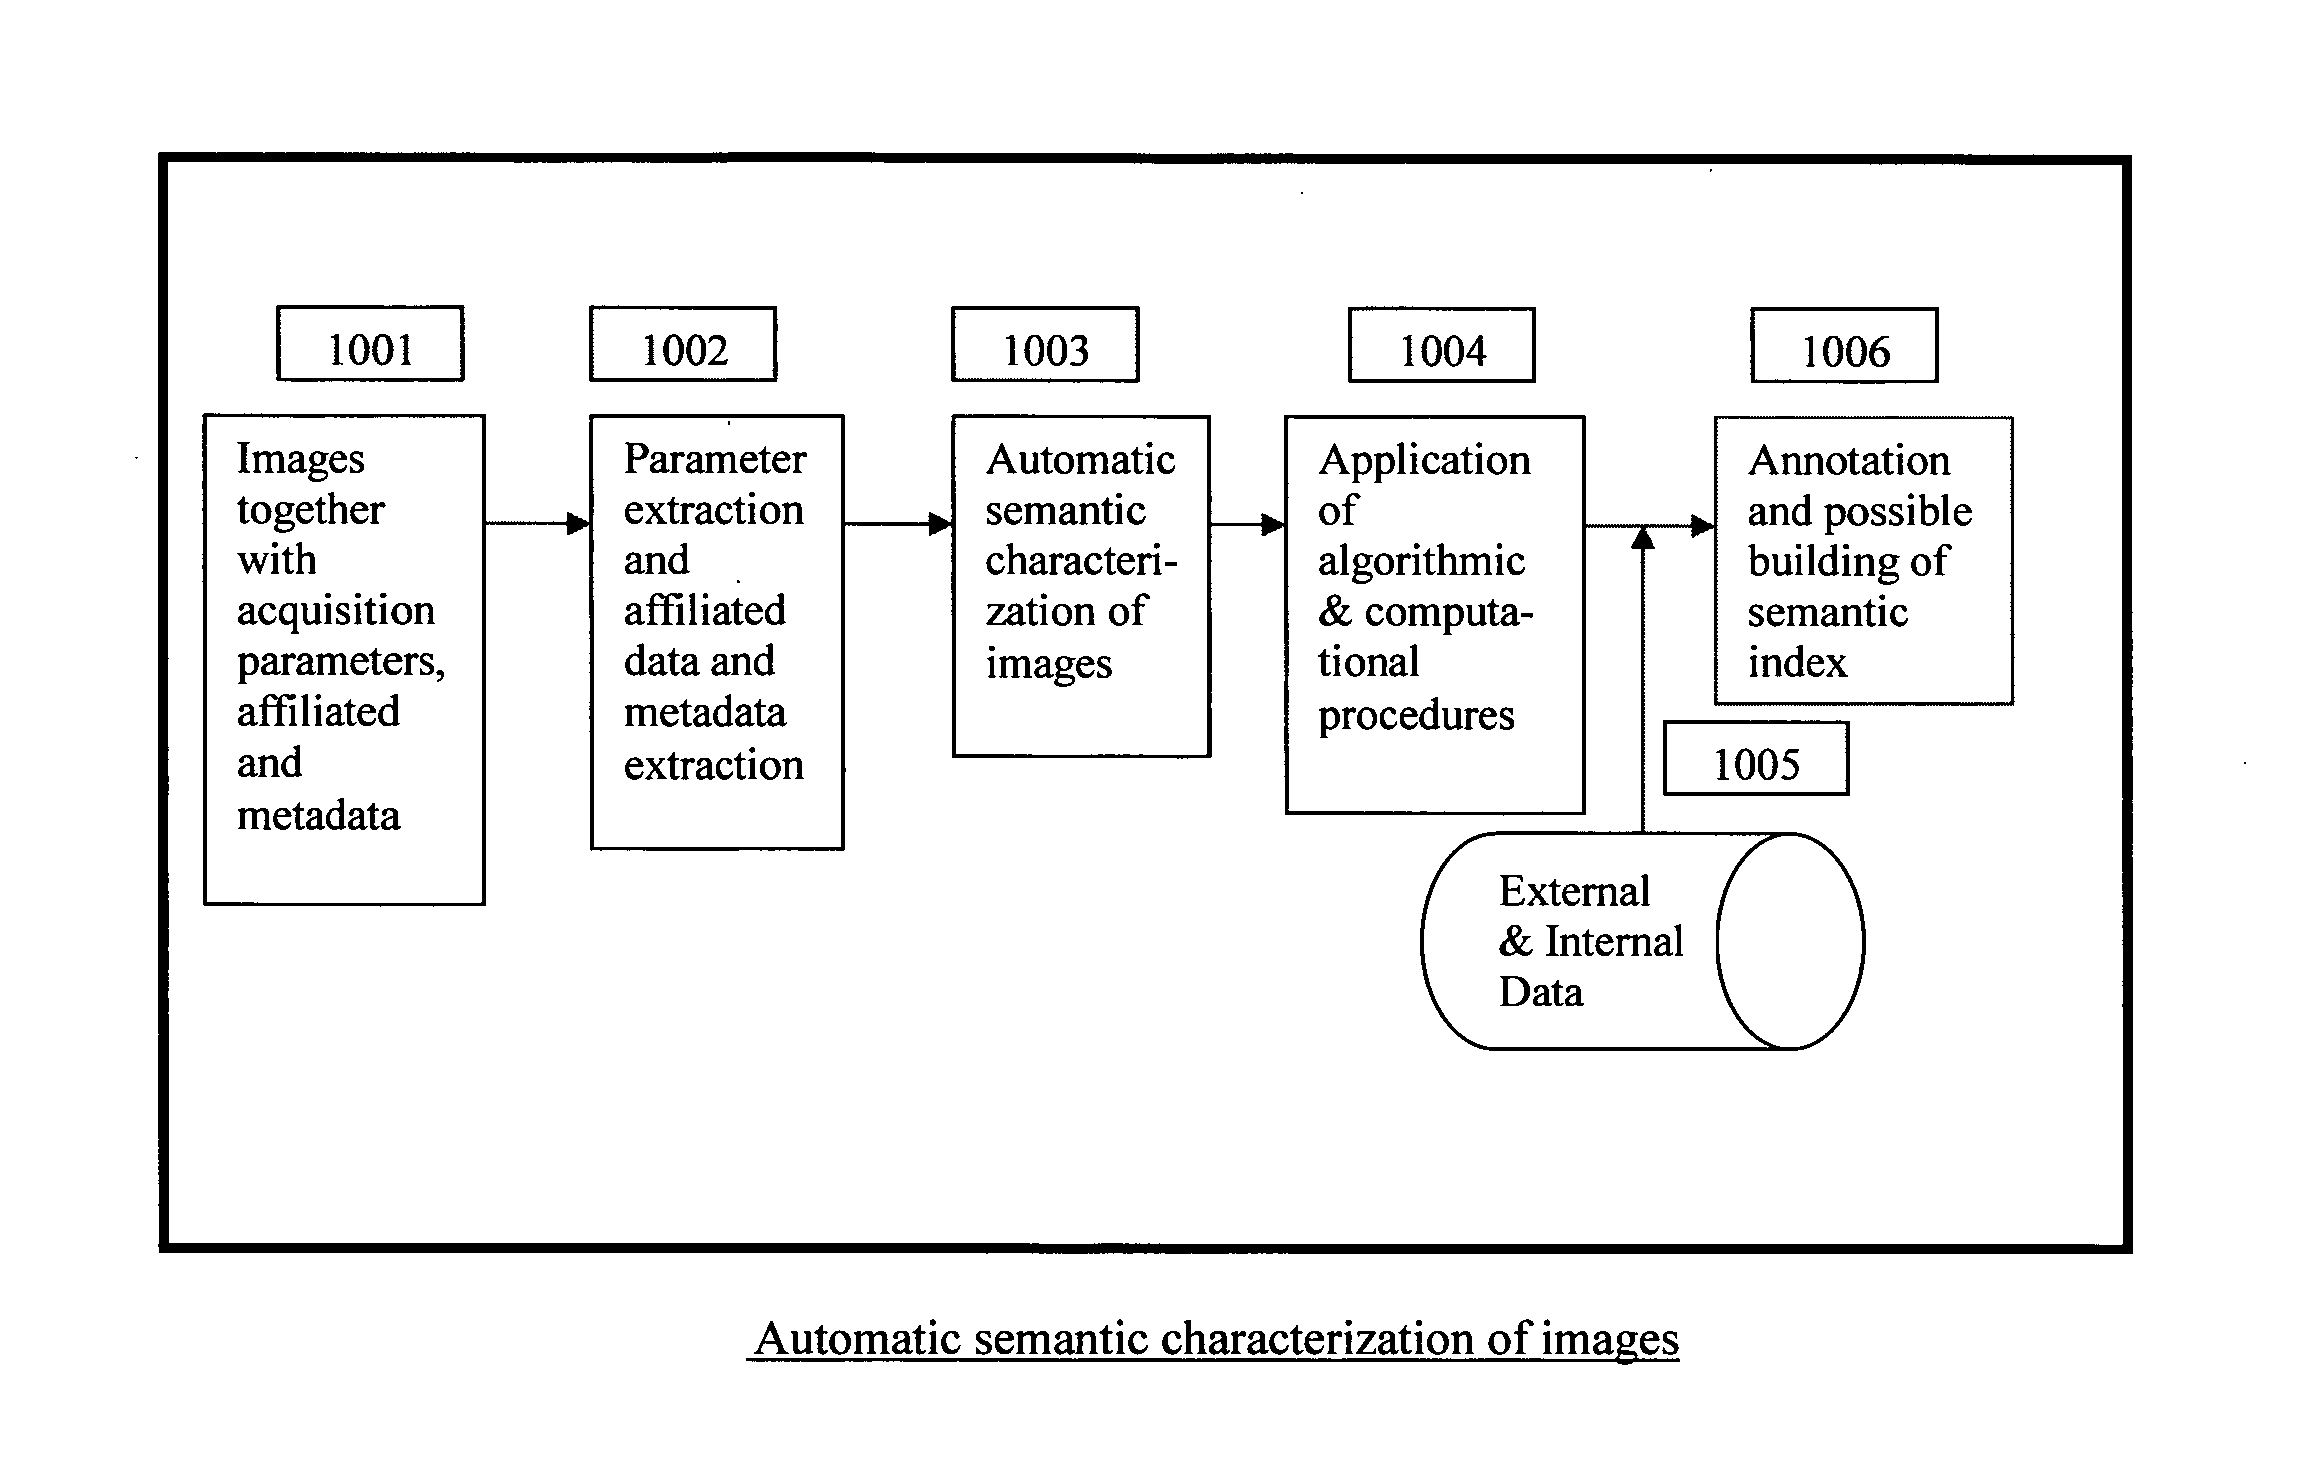 Automatic and semi-automatic image classification, annotation and tagging through the use of image acquisition parameters and metadata